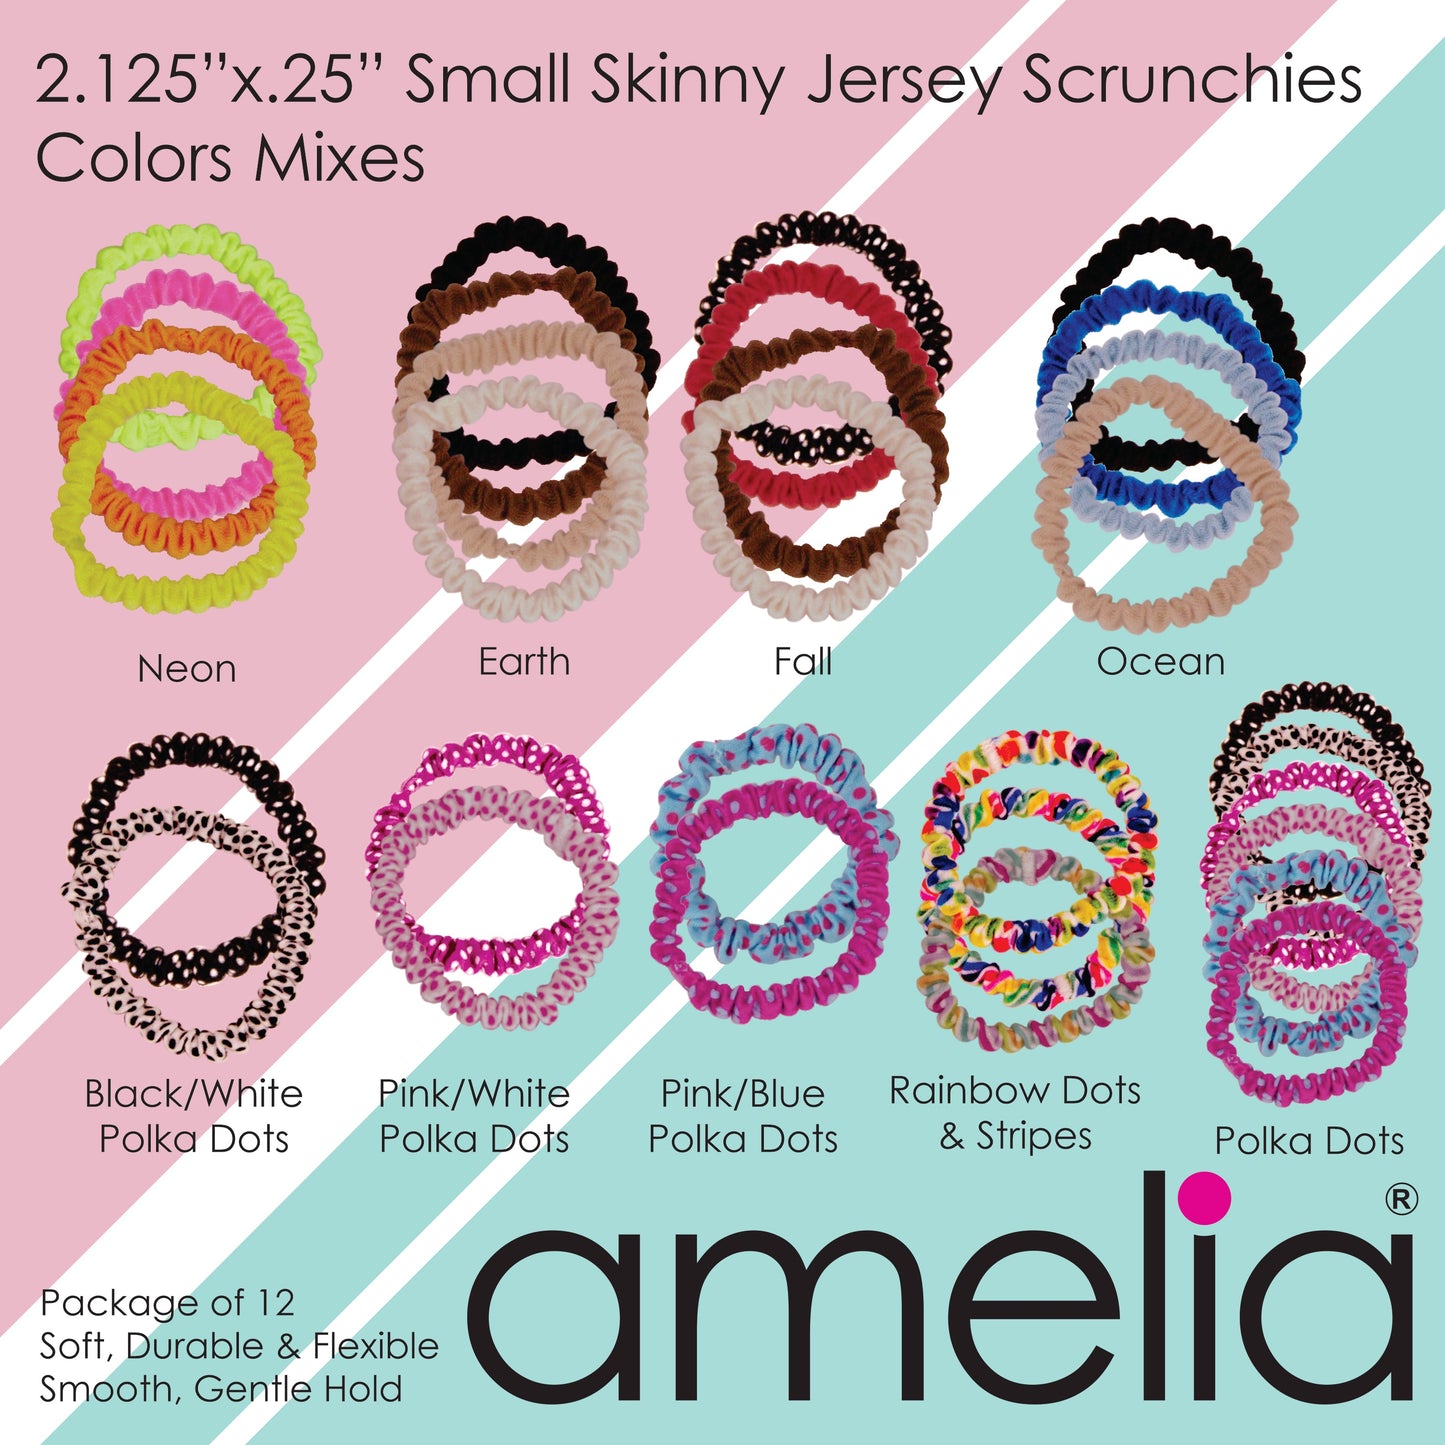 Amelia Beauty, White Skinny Jersey Scrunchies, 2.125in Diameter, Gentle on Hair, Strong Hold, No Snag, No Dents or Creases. 12 Pack